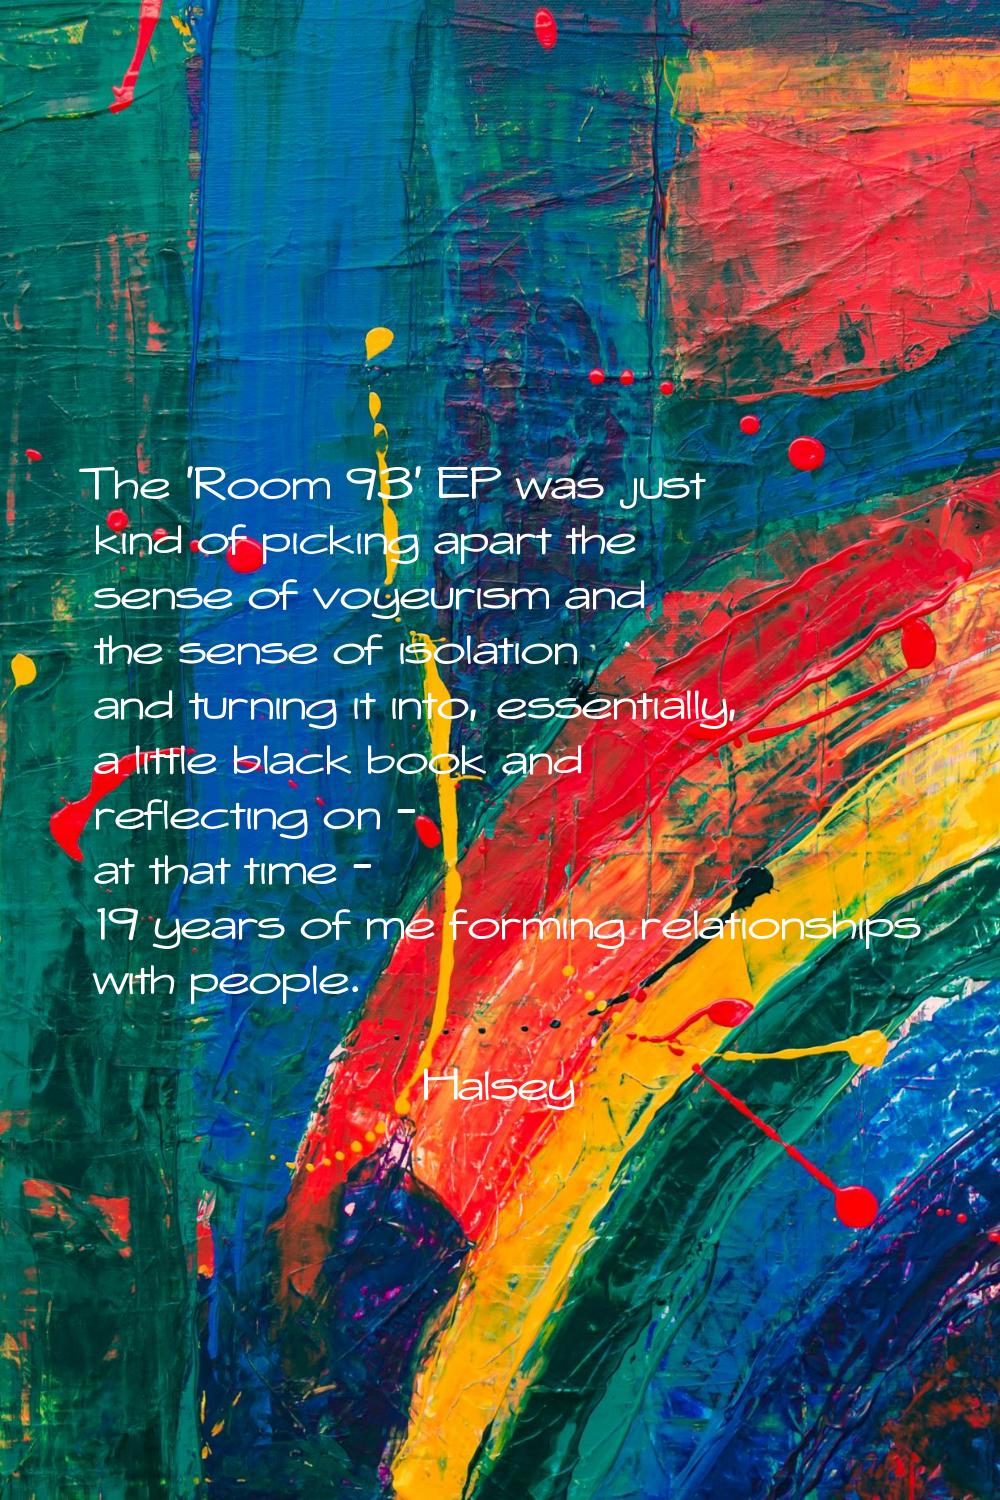 The 'Room 93' EP was just kind of picking apart the sense of voyeurism and the sense of isolation a